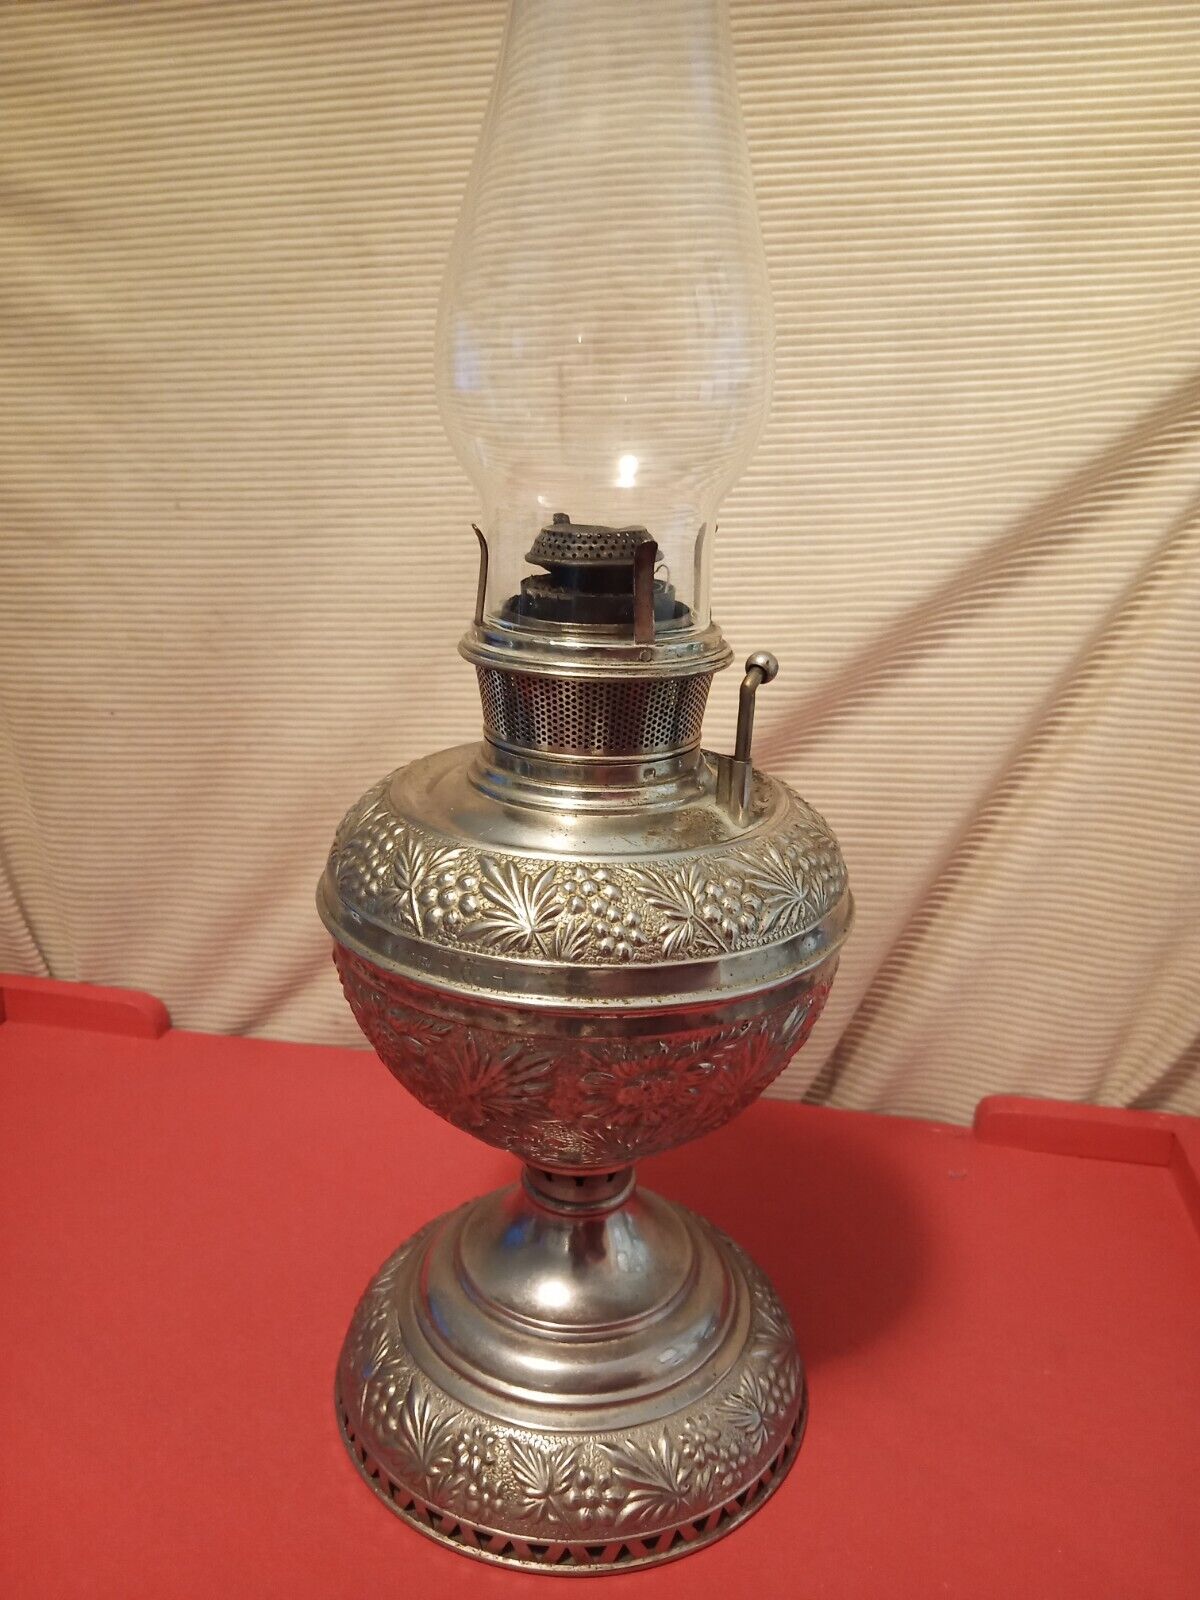 B&H Bradley Hubbard Oil Lamp Embossed 1890s Victorian Style Antique